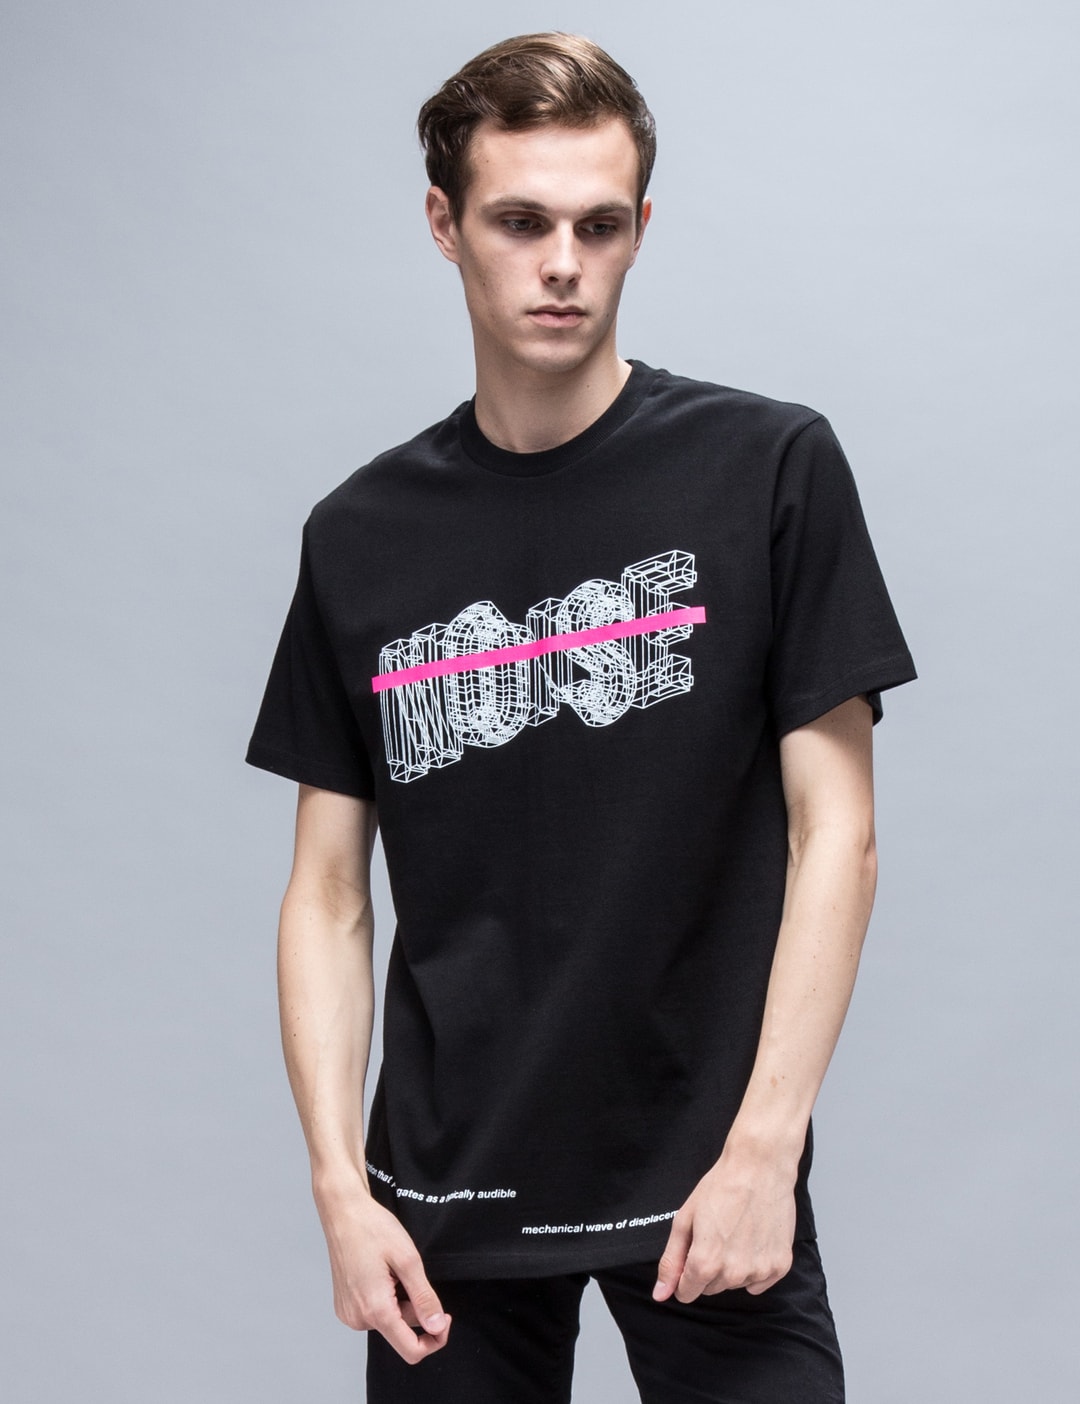 Krsp - Acoustic S/S T-Shirt | HBX - Globally Curated Fashion and ...